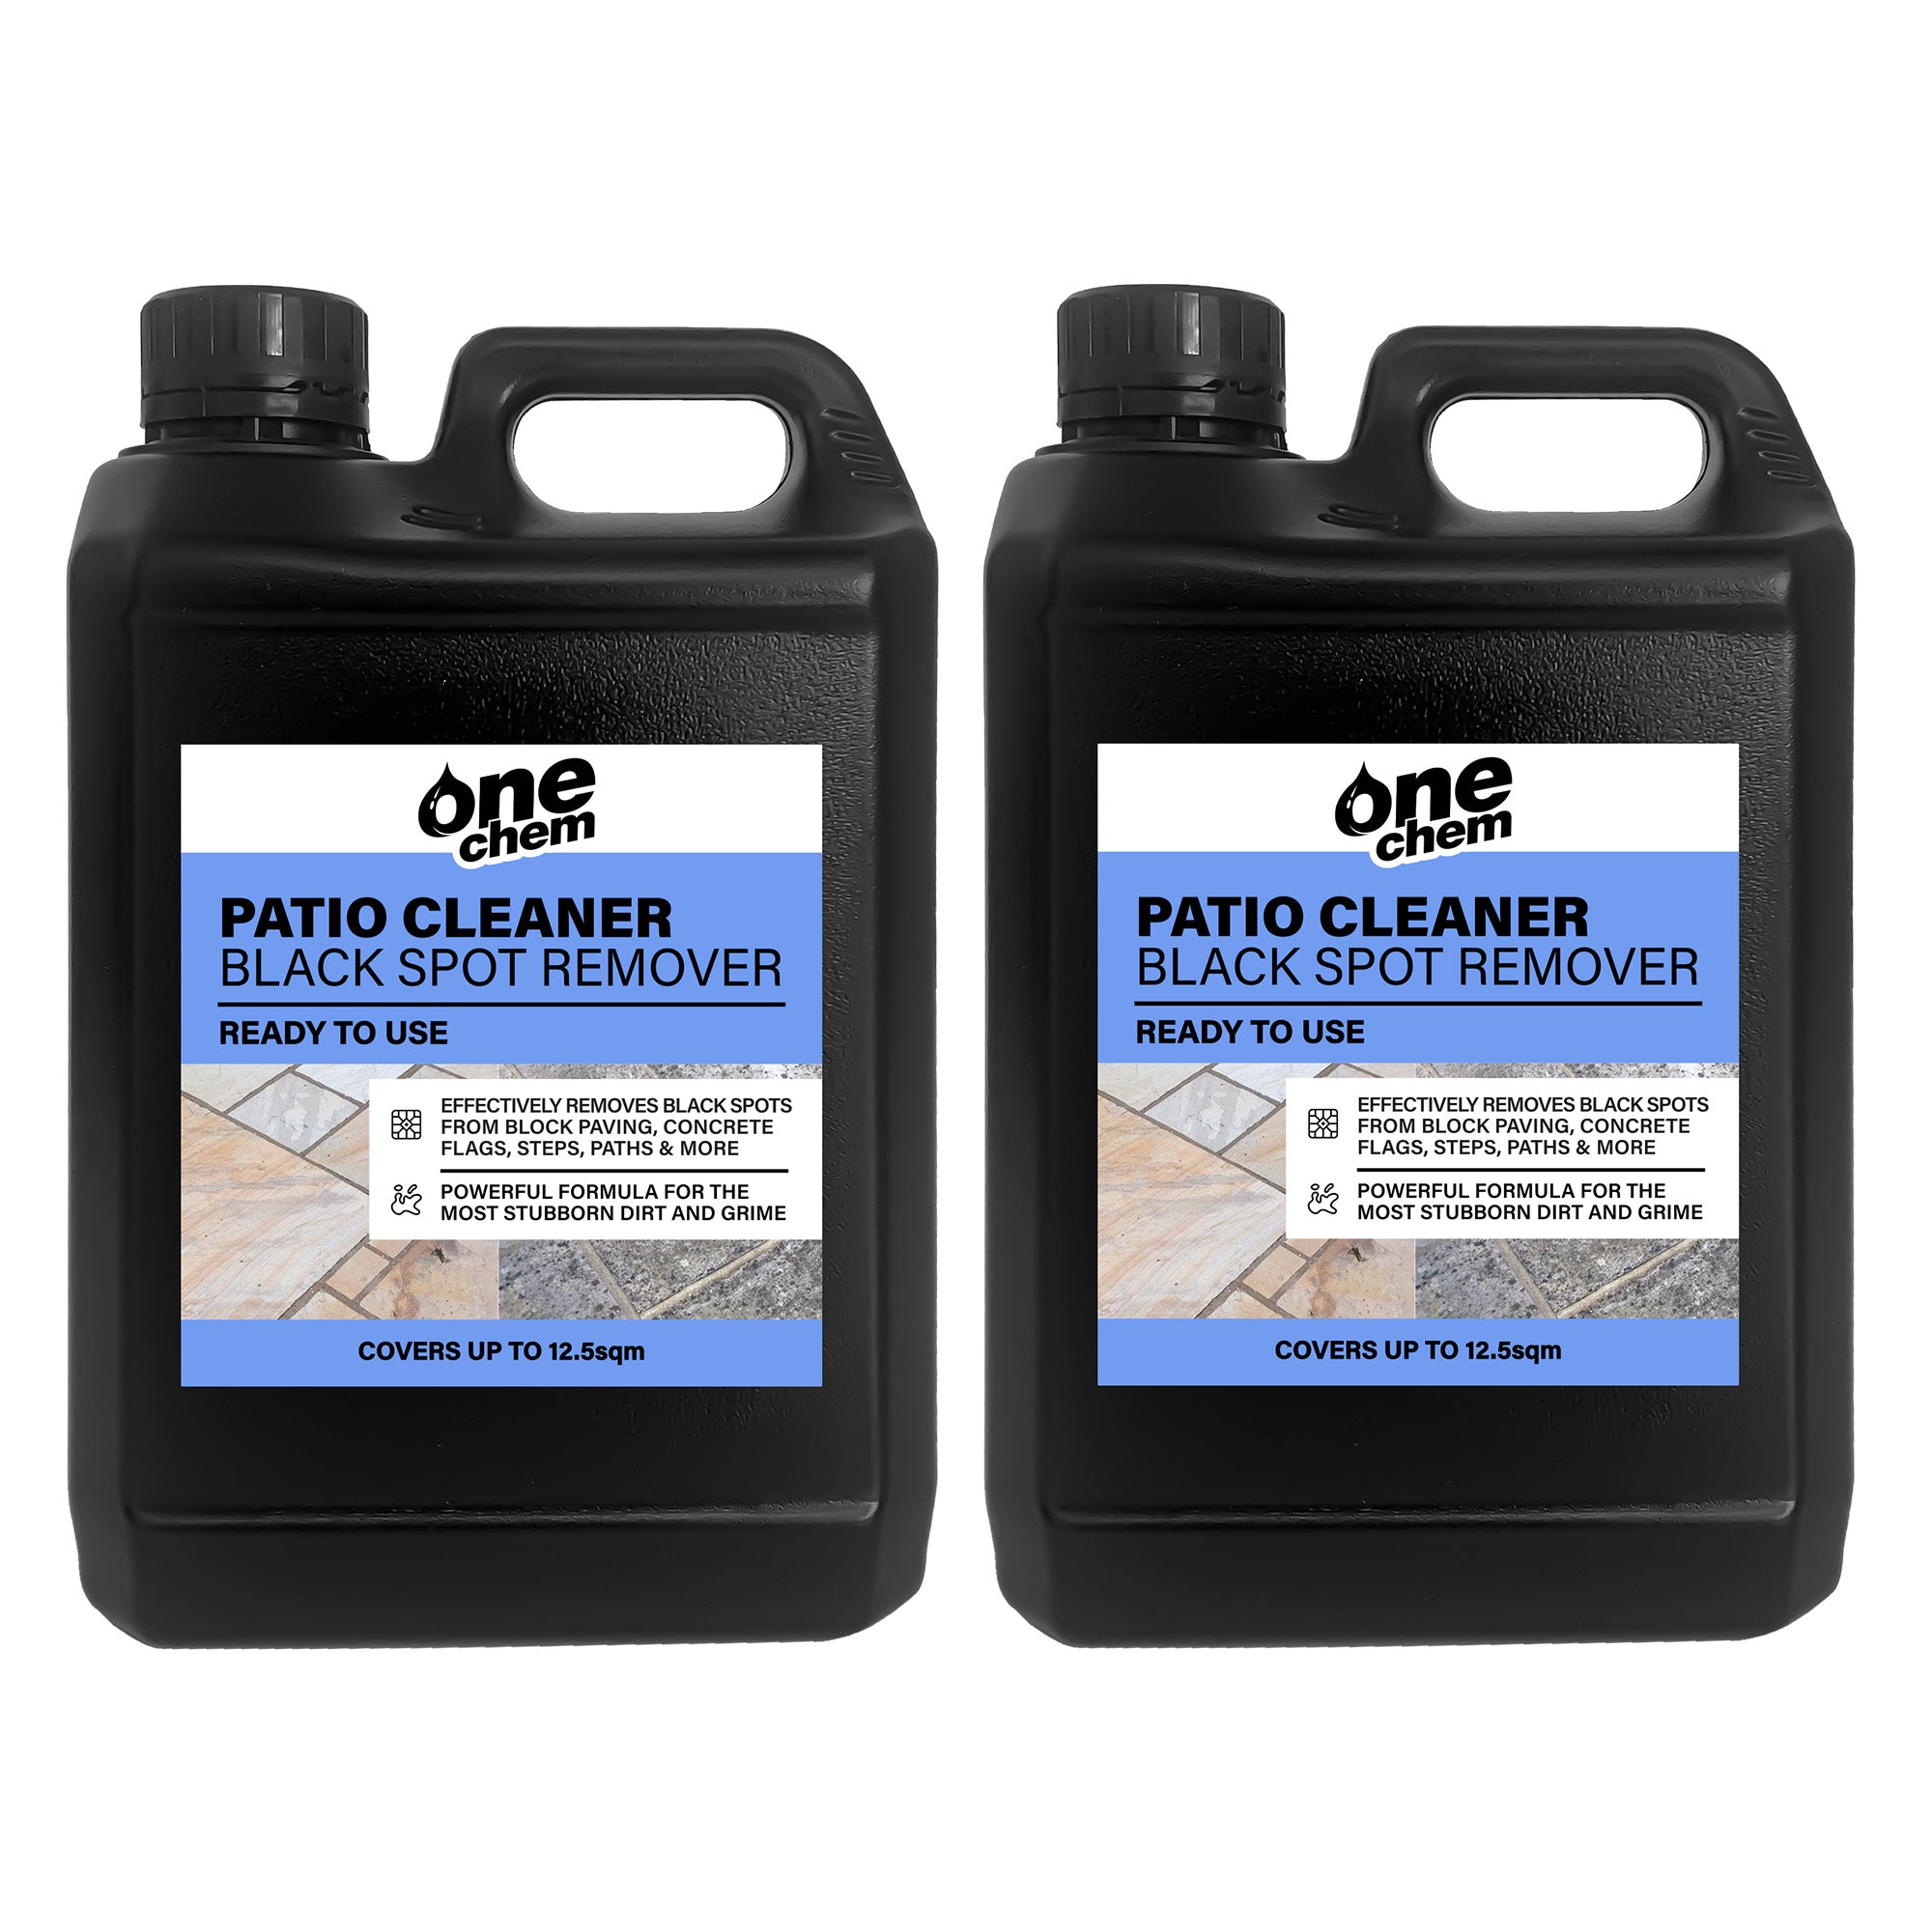 One Chem - Black Spot Remover - 2 x 2.5L - Ready to Use Patio Cleaner